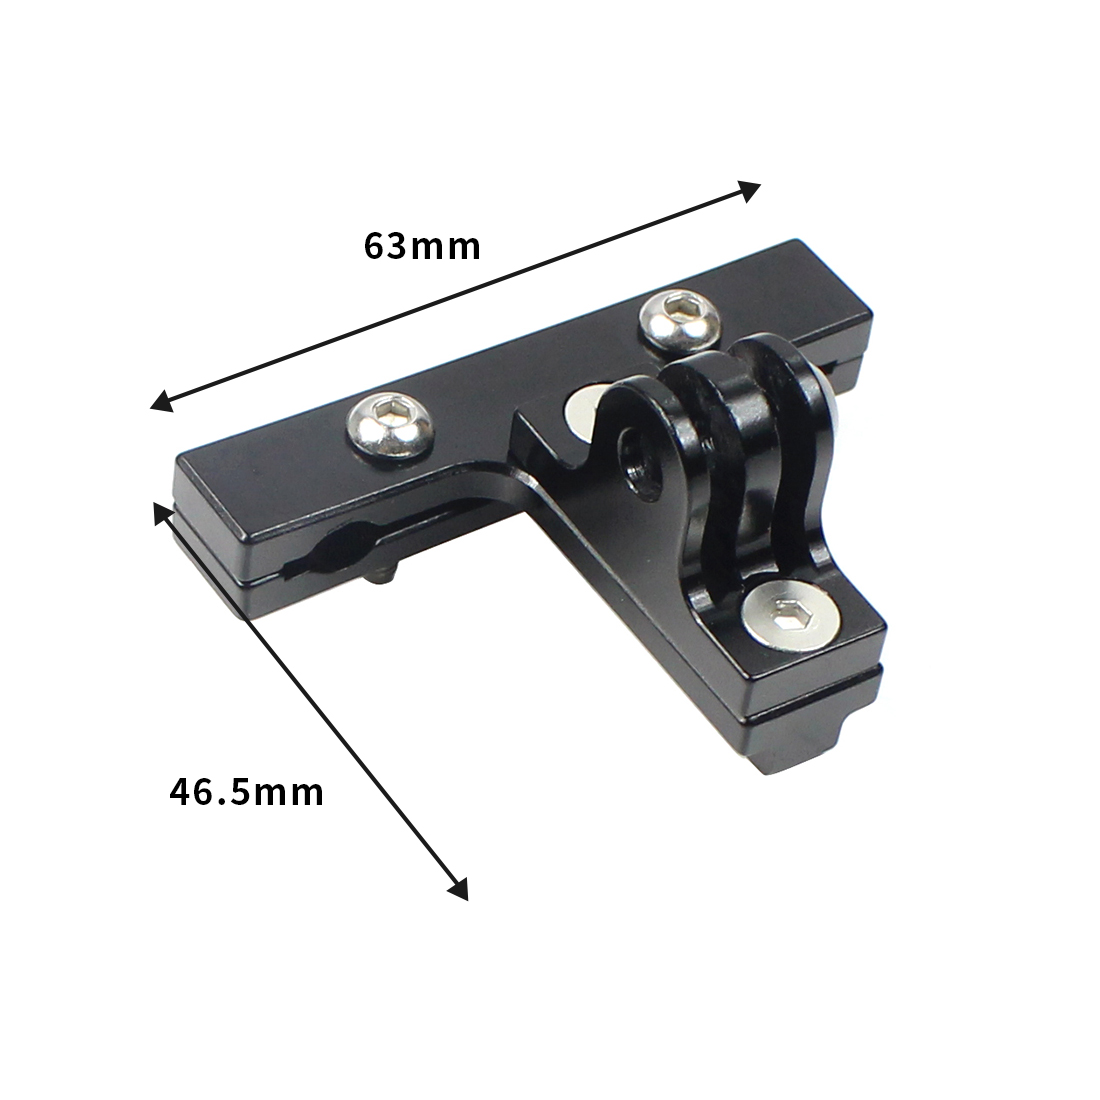 BGNing Bicycle Seat Base Camera Fixed Mount Connector Bracket Adapter with Thumb Knob Screw for GOPRO 3+ 4 5 /SJcam /Yi /GitUp Cameras